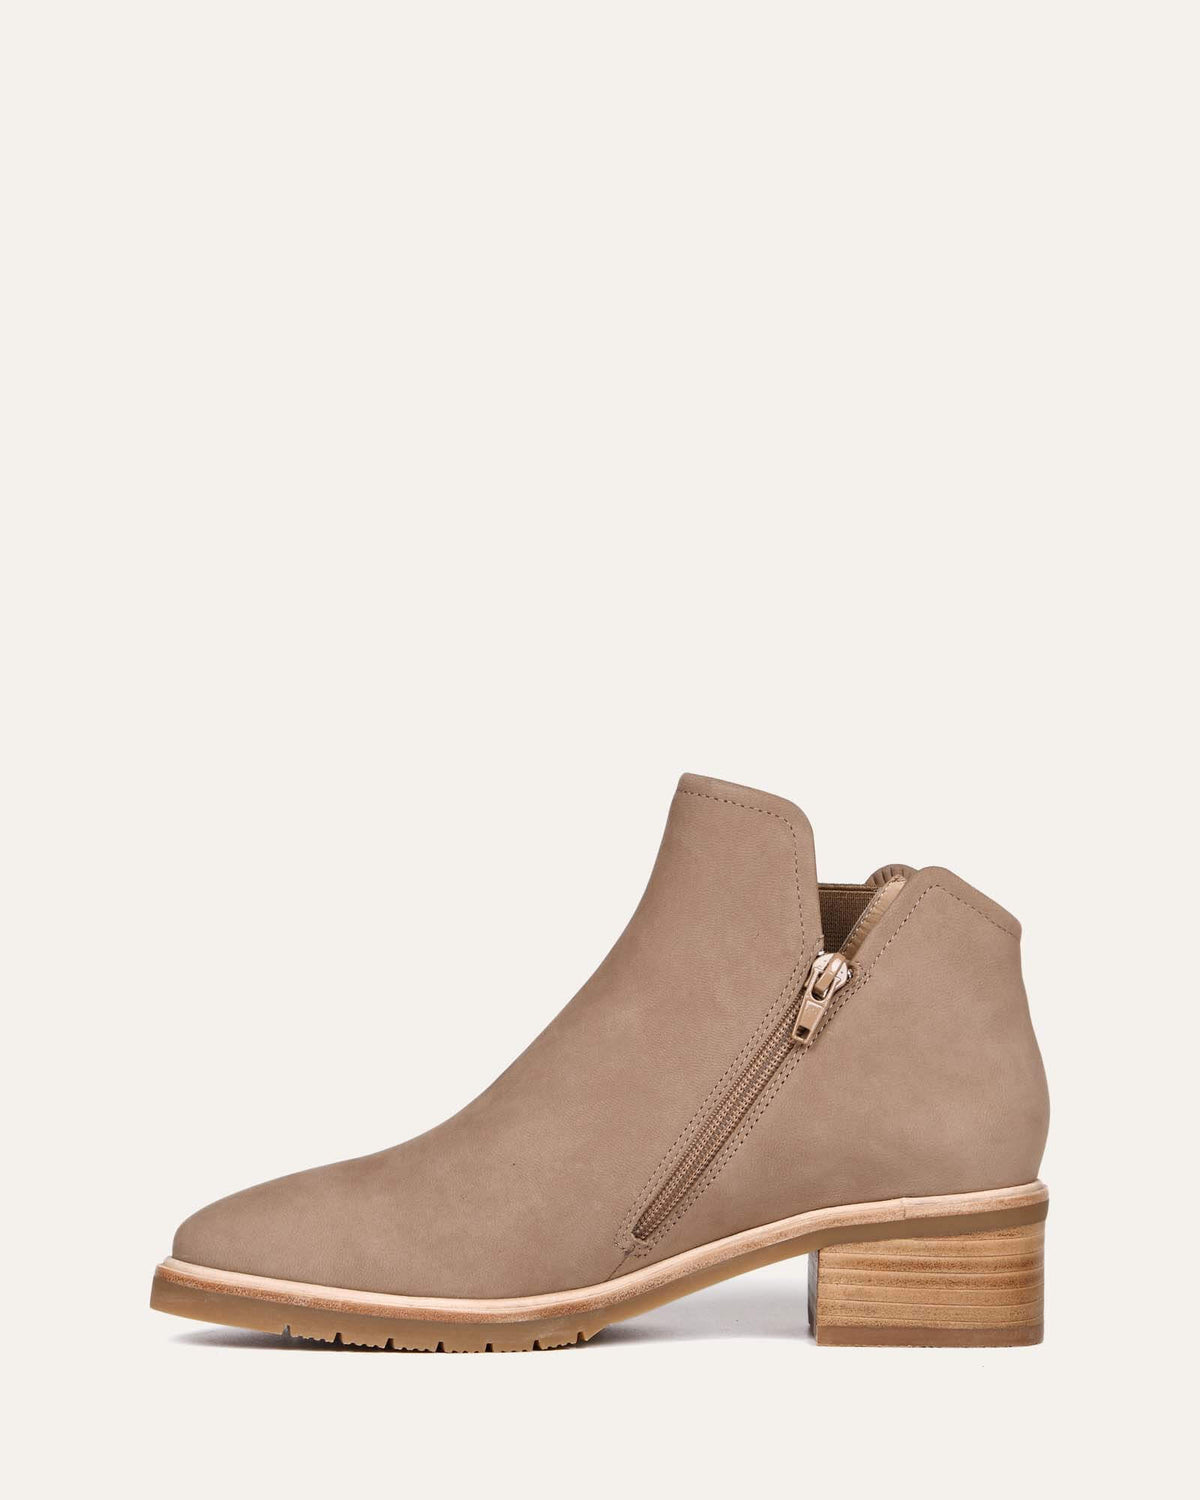 ARTIE FLAT ANKLE BOOTS TAUPE NUBUCK